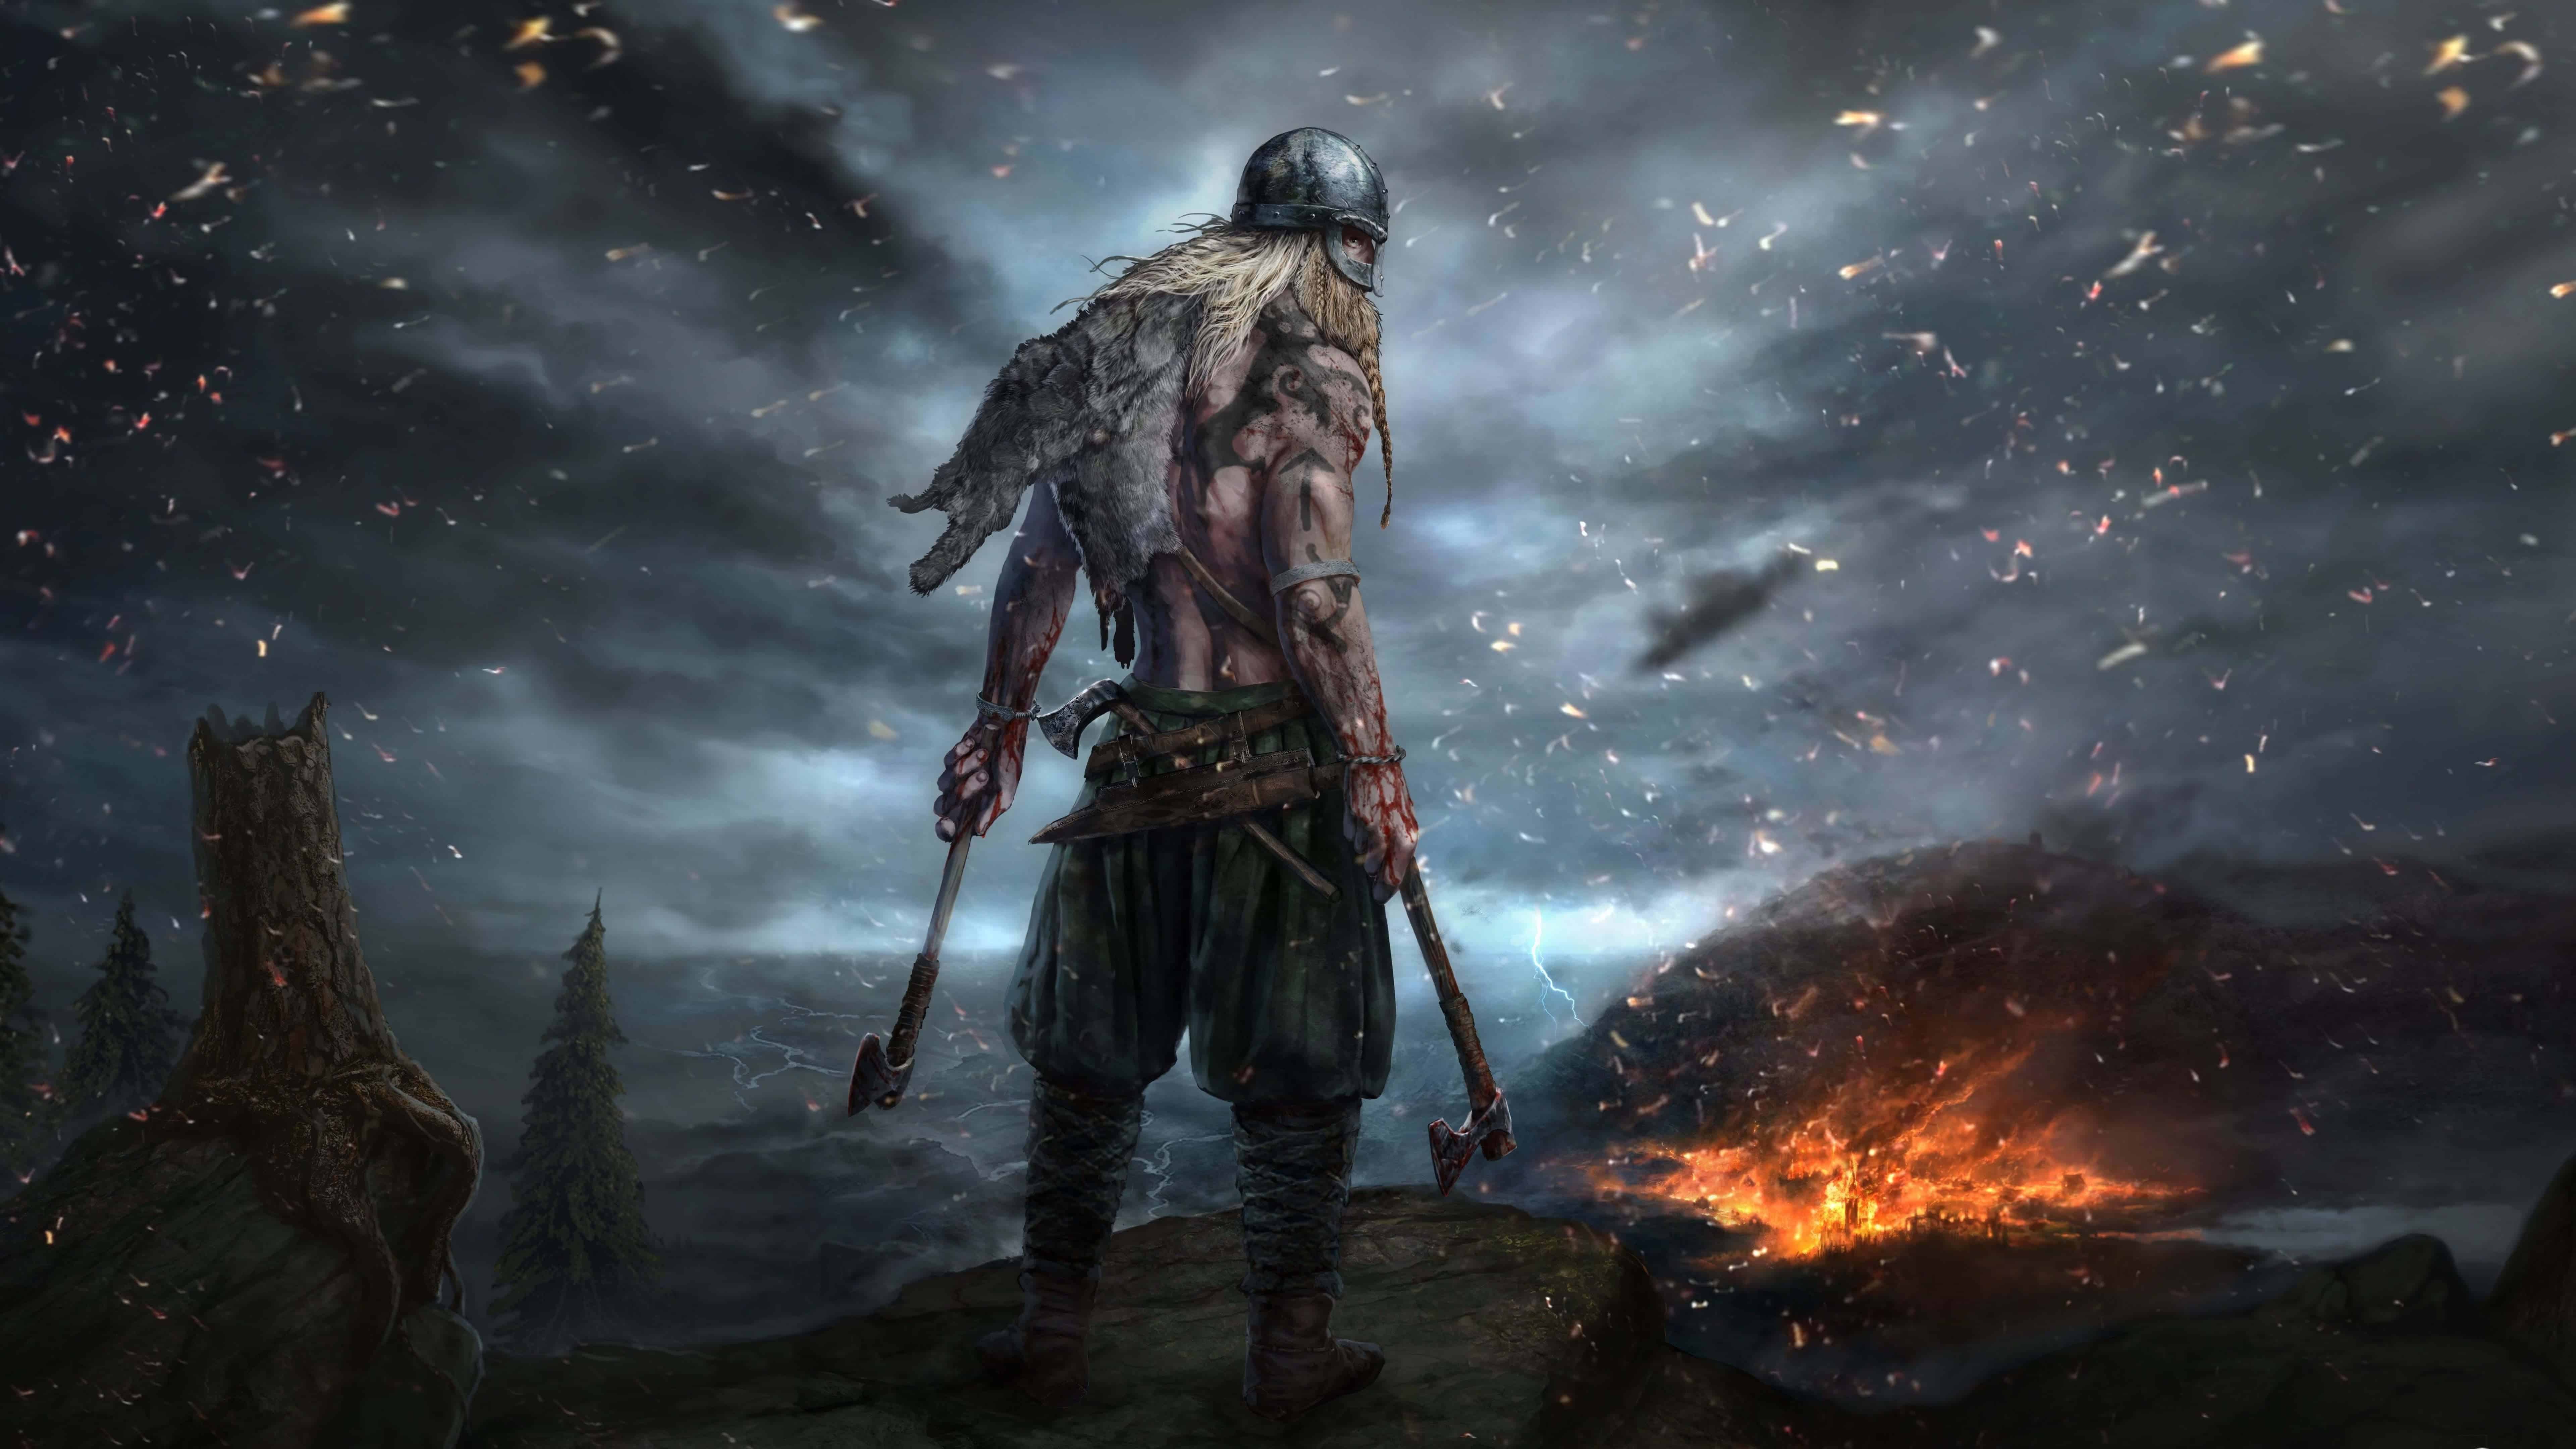 Viking 4K wallpapers for your desktop or mobile screen free and